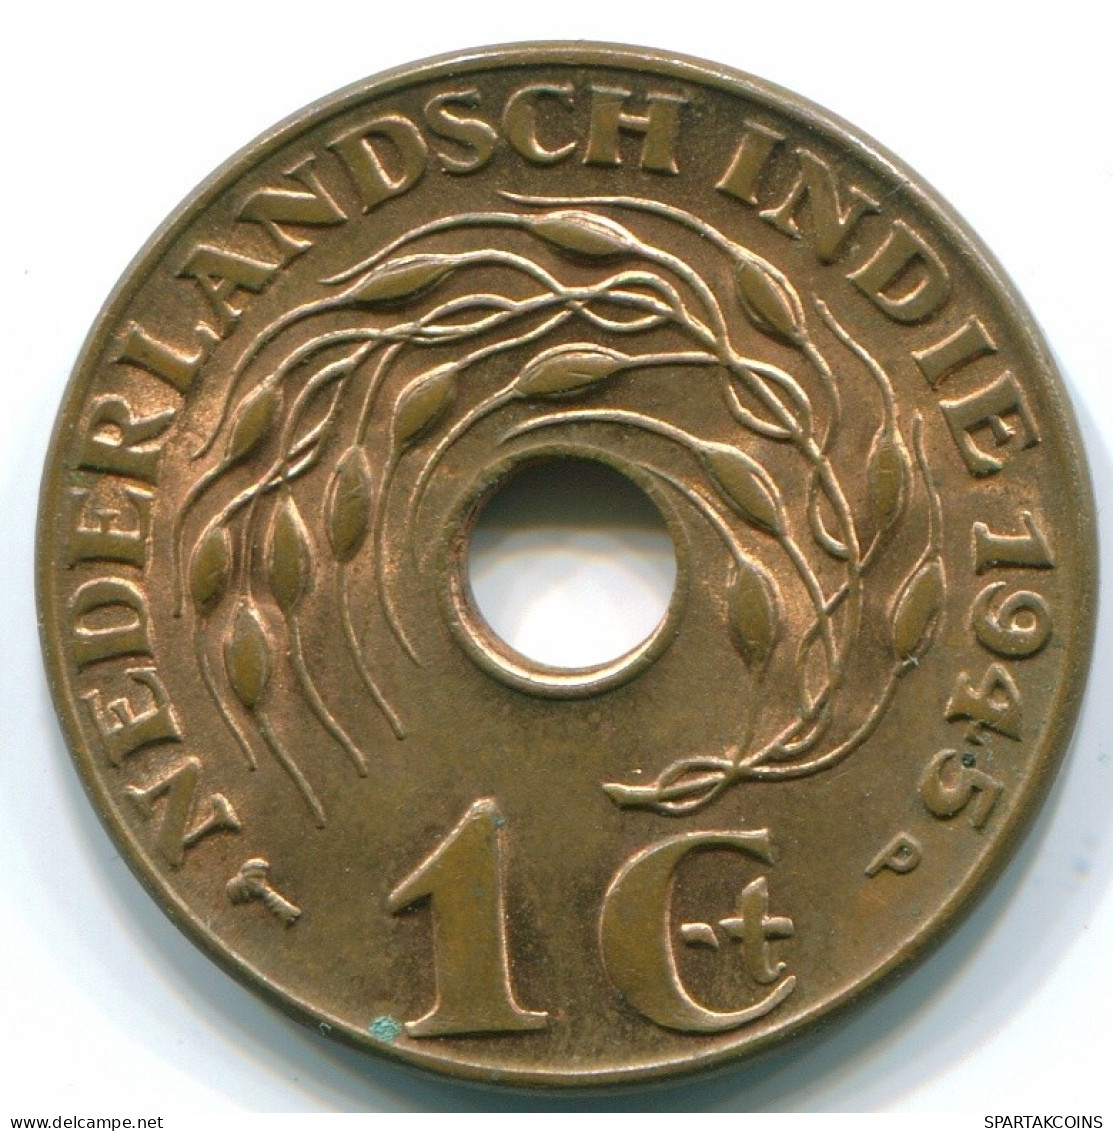 1 CENT 1945 P NETHERLANDS EAST INDIES INDONESIA Bronze Colonial Coin #S10446.U.A - Indie Olandesi